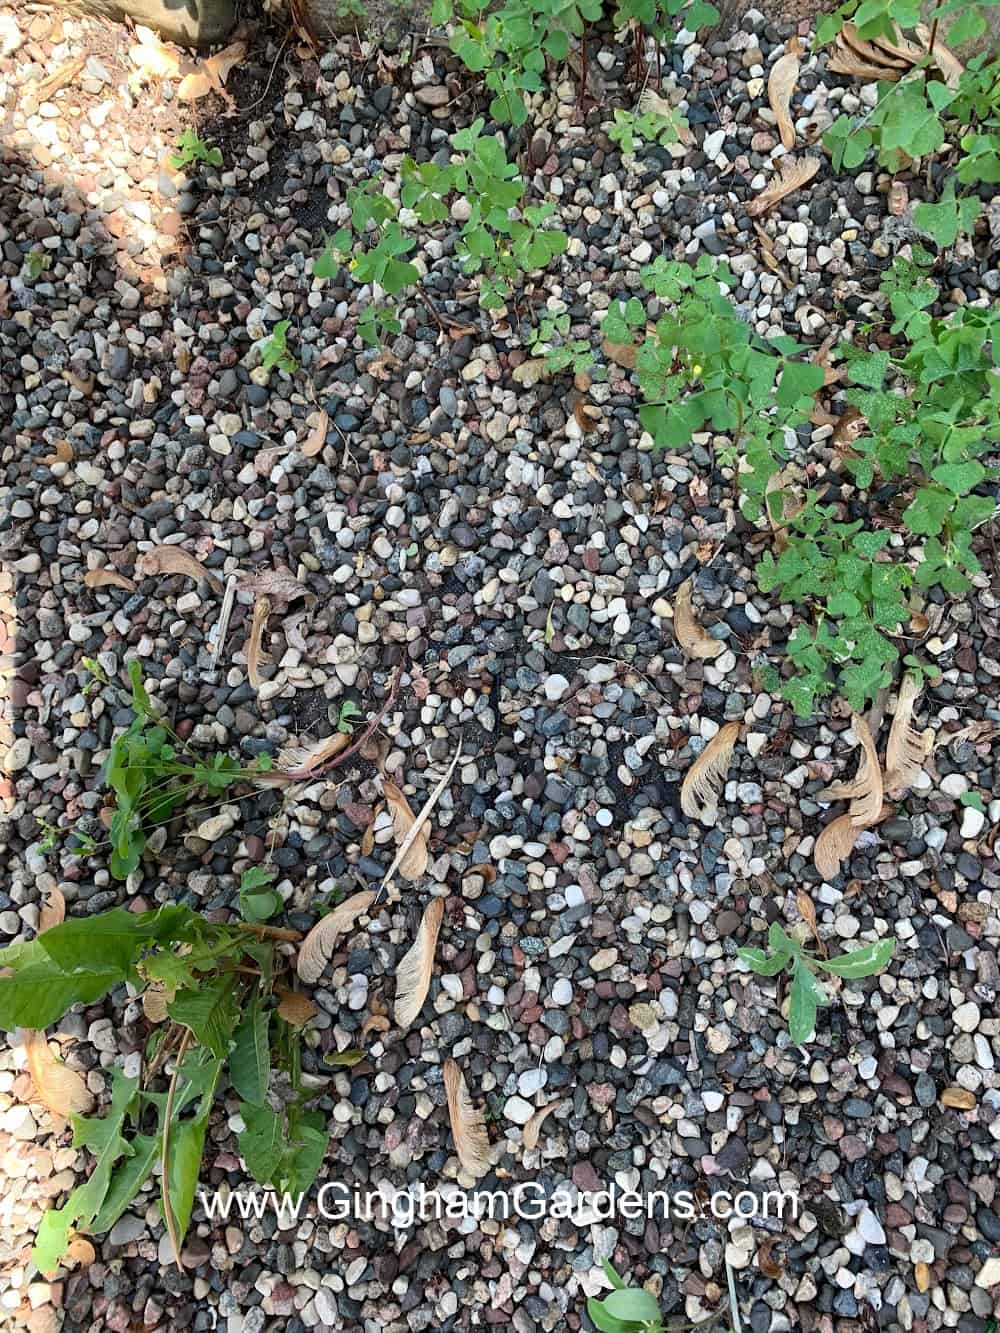 Weeds growing in a gravel path.